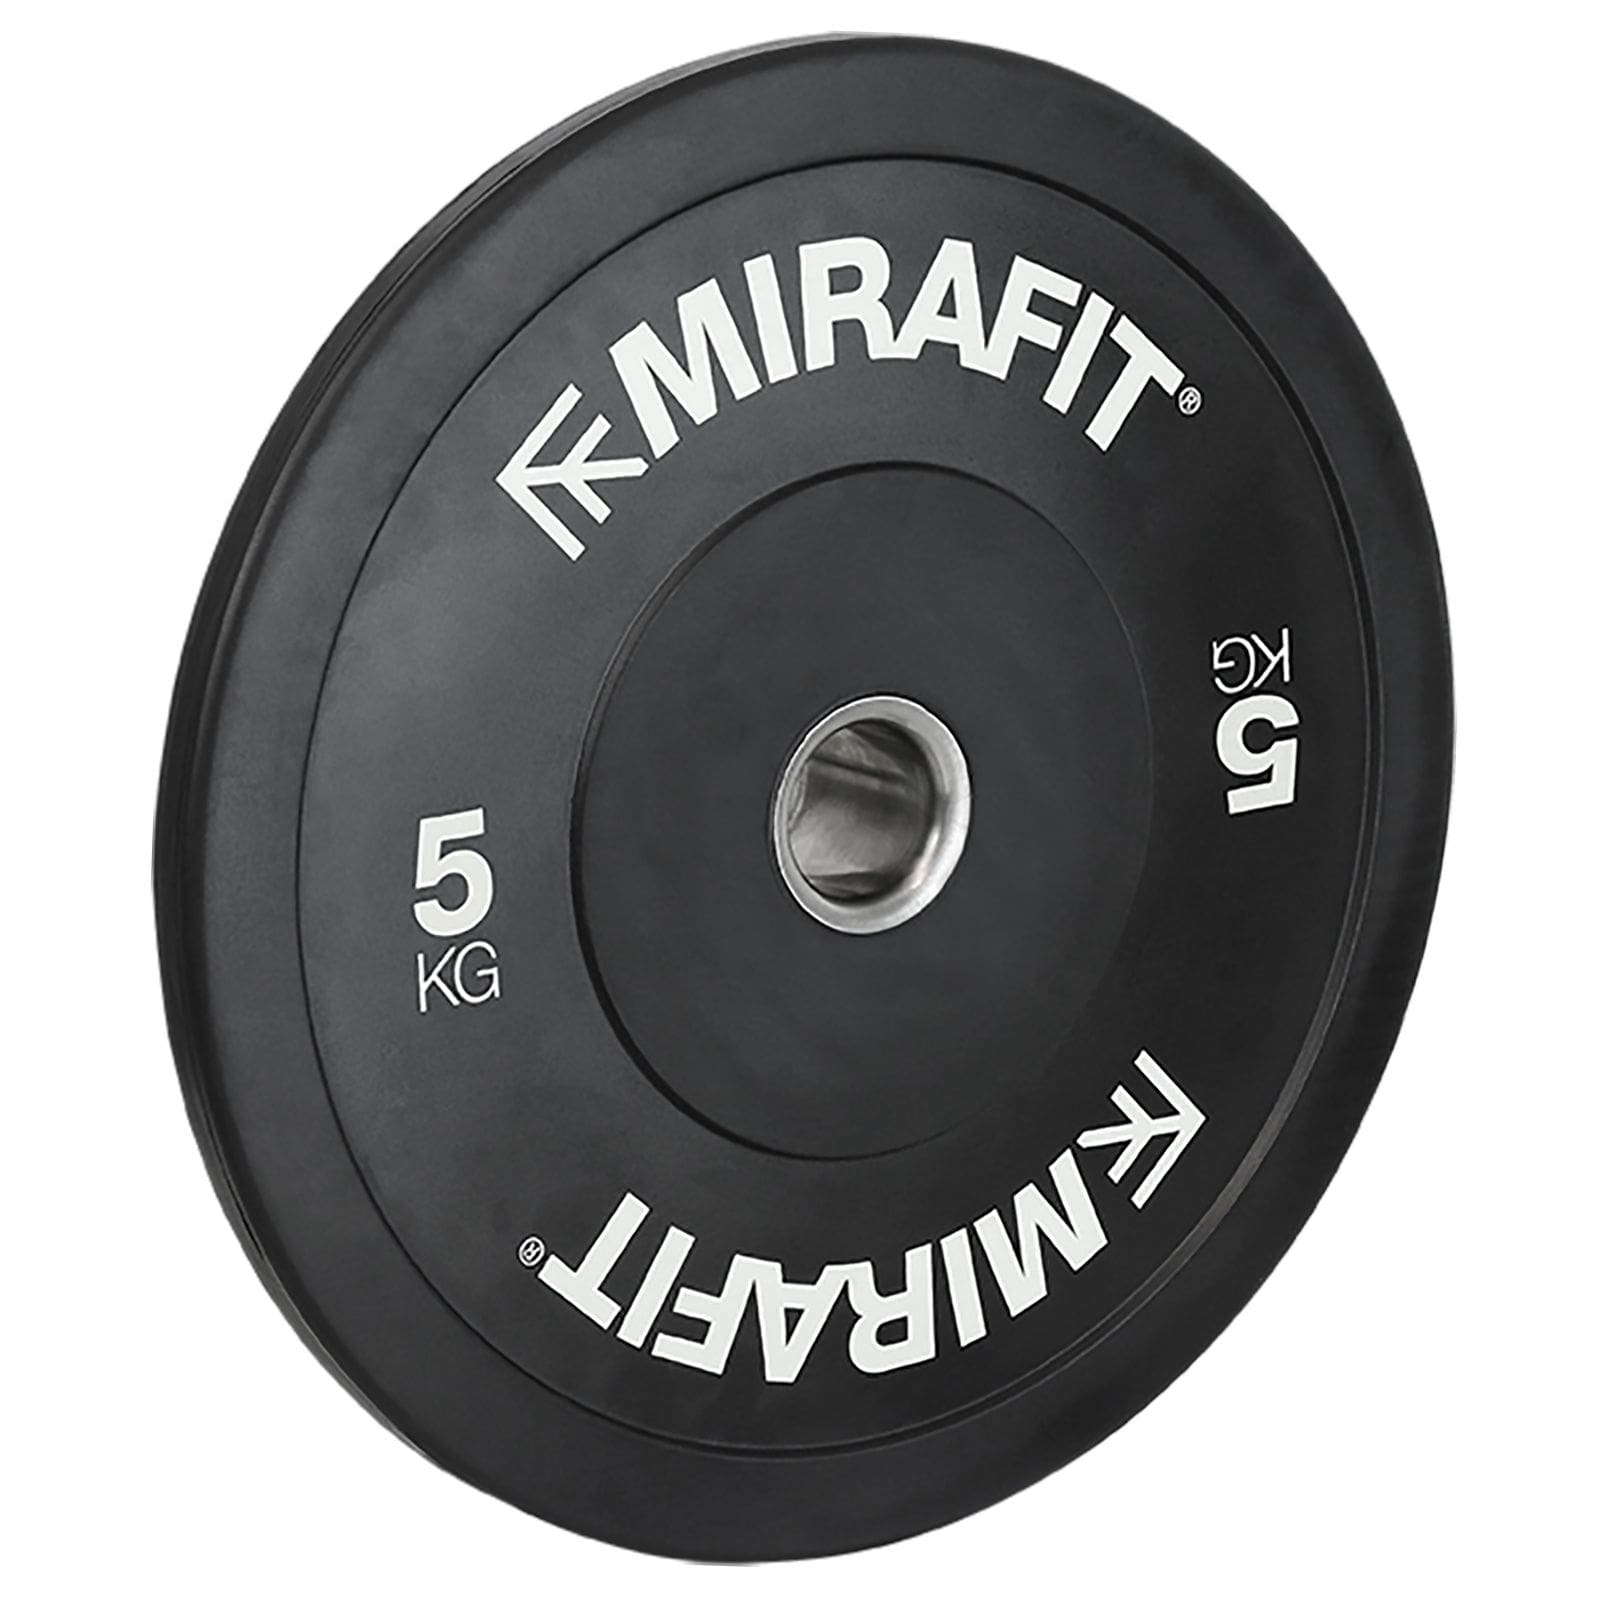 Mirafit Black Olympic Rubber Bumper Plates Review Summary